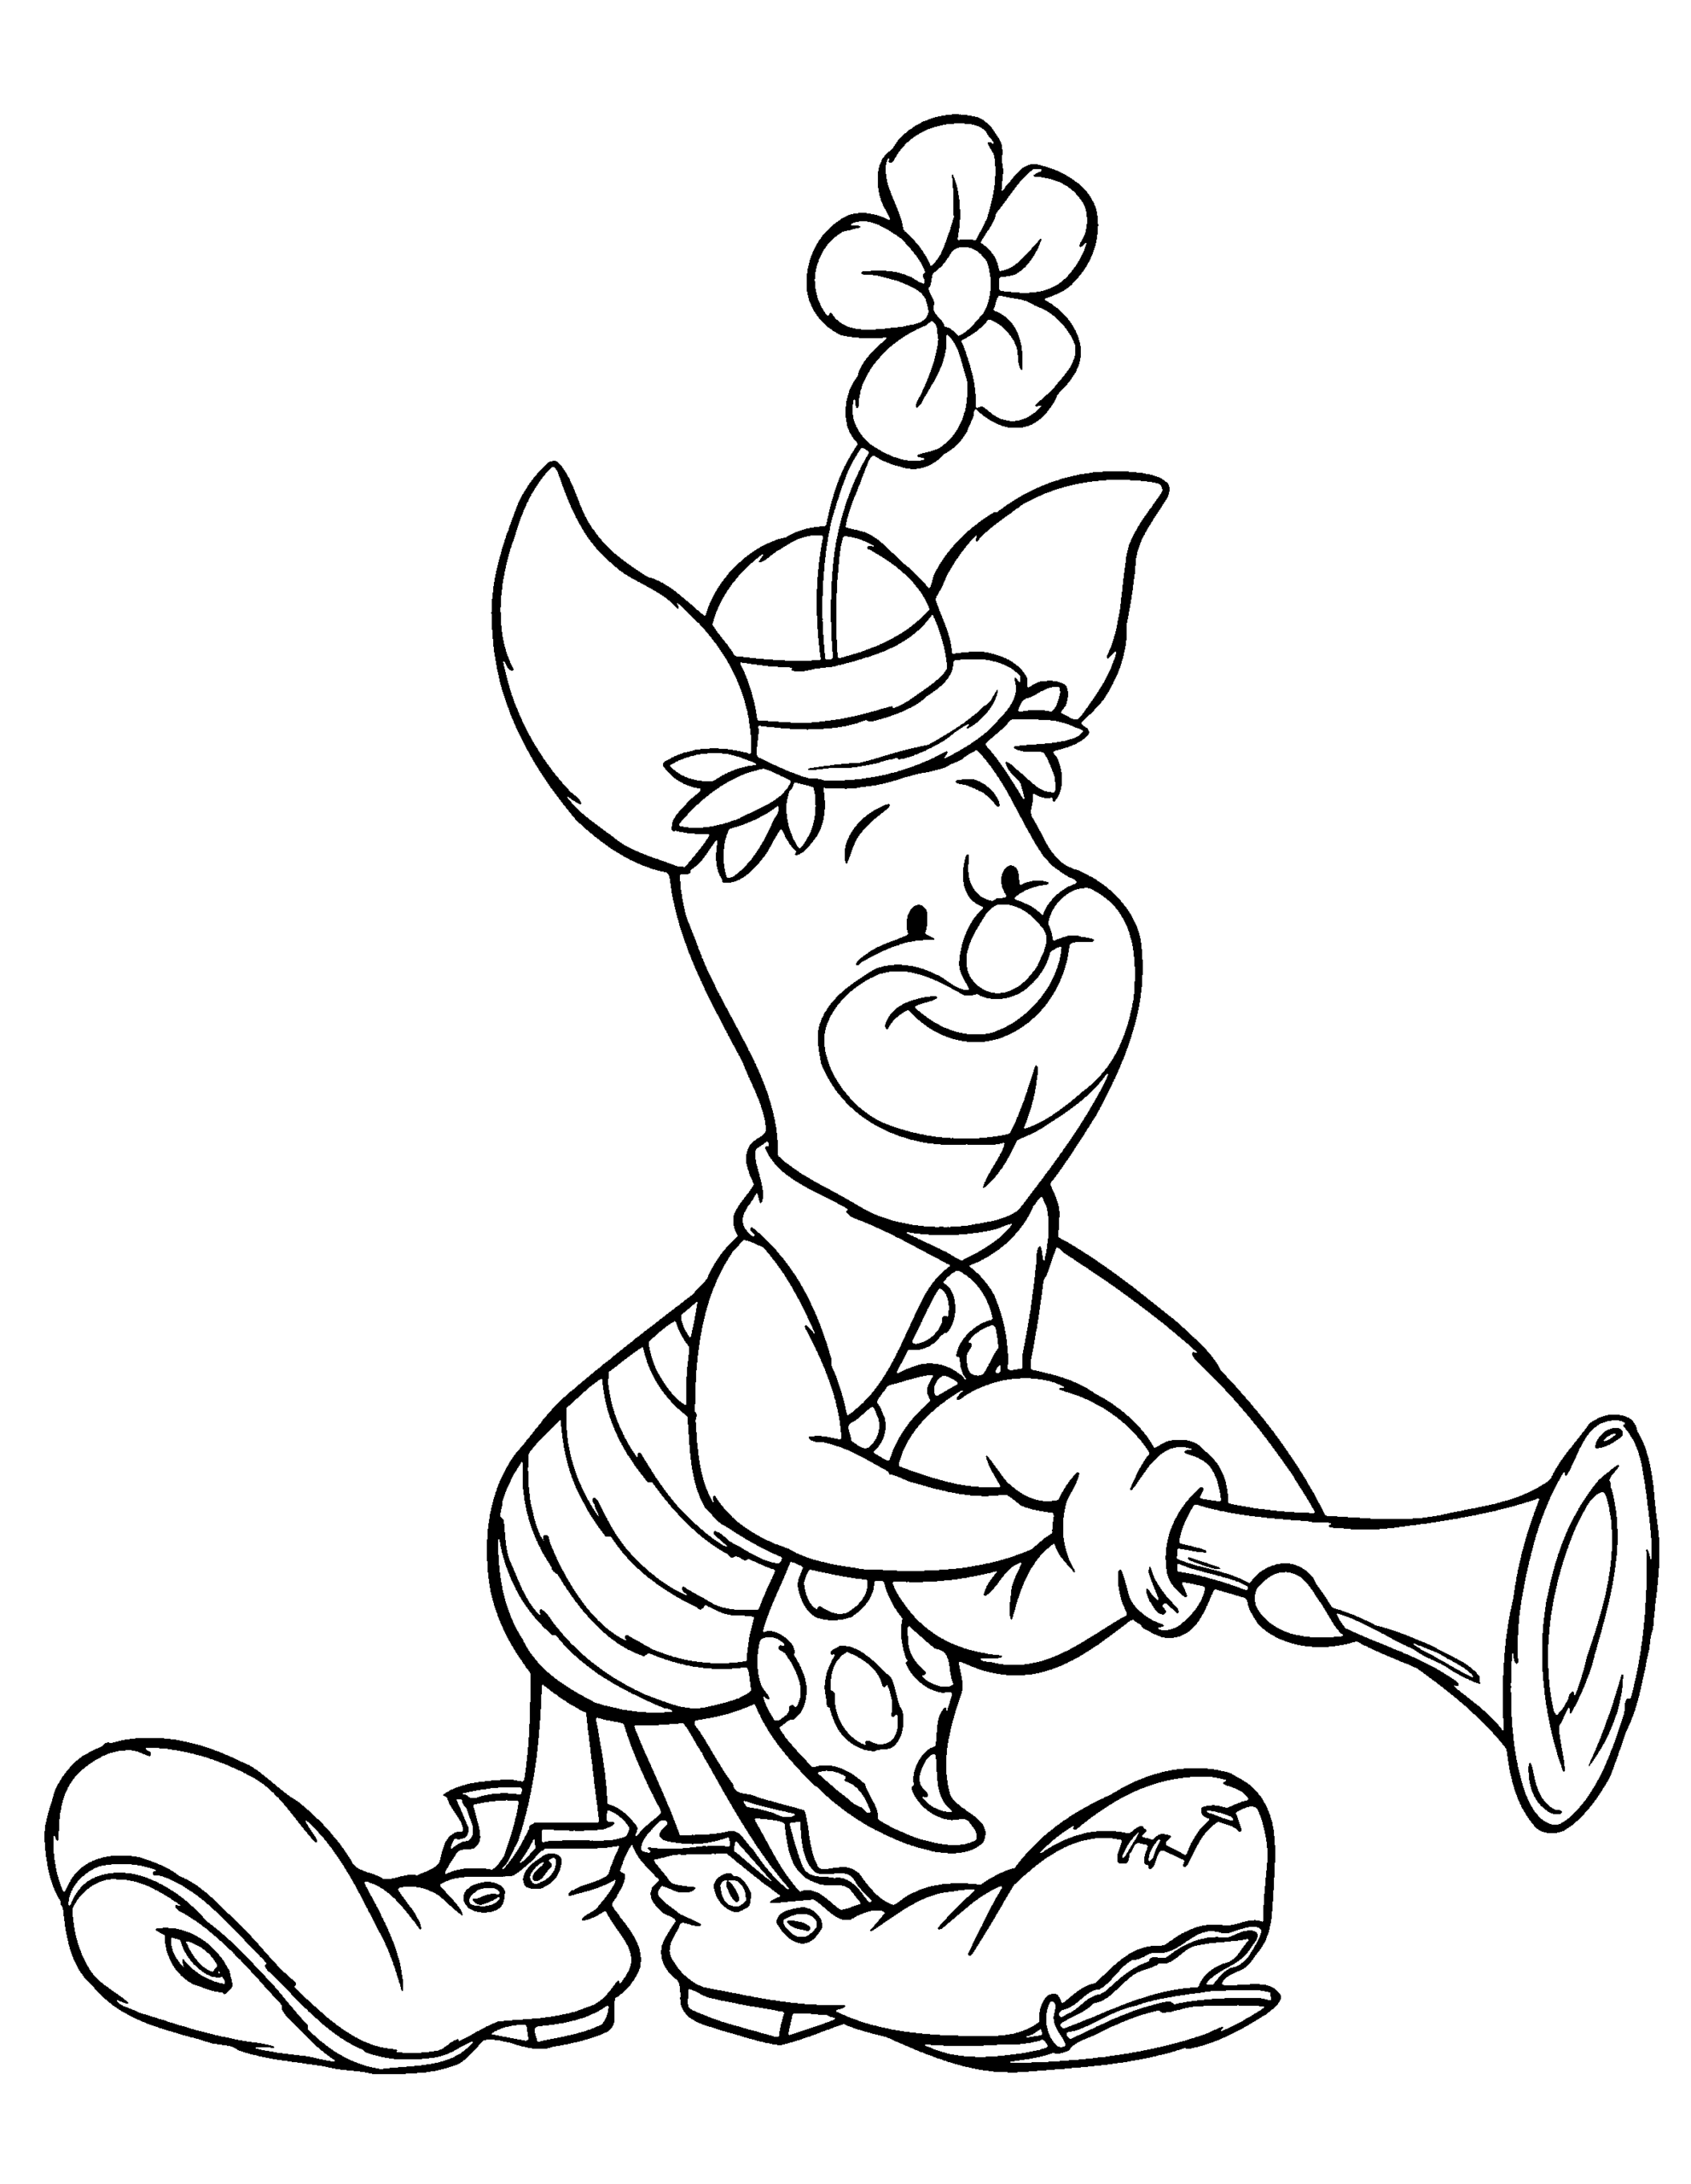 Winnie the Pooh Coloring Pages Cartoons winnie the pooh 41 Printable 2020 7148 Coloring4free